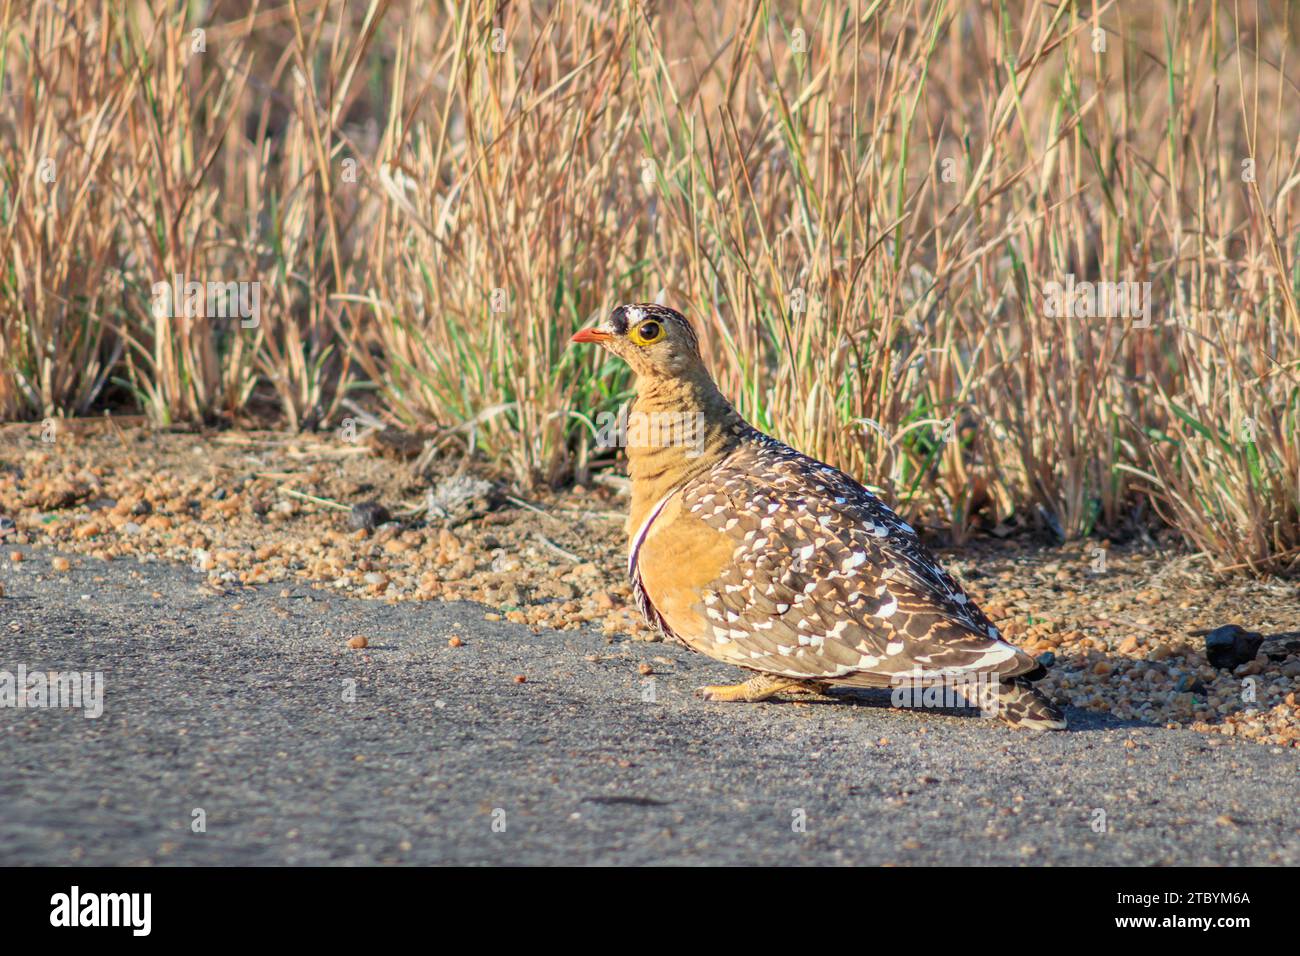 Male Double-banded sandgrouse (Pterocles bicinctus) feeding during the day, Kruger National Park, South Africa Stock Photo